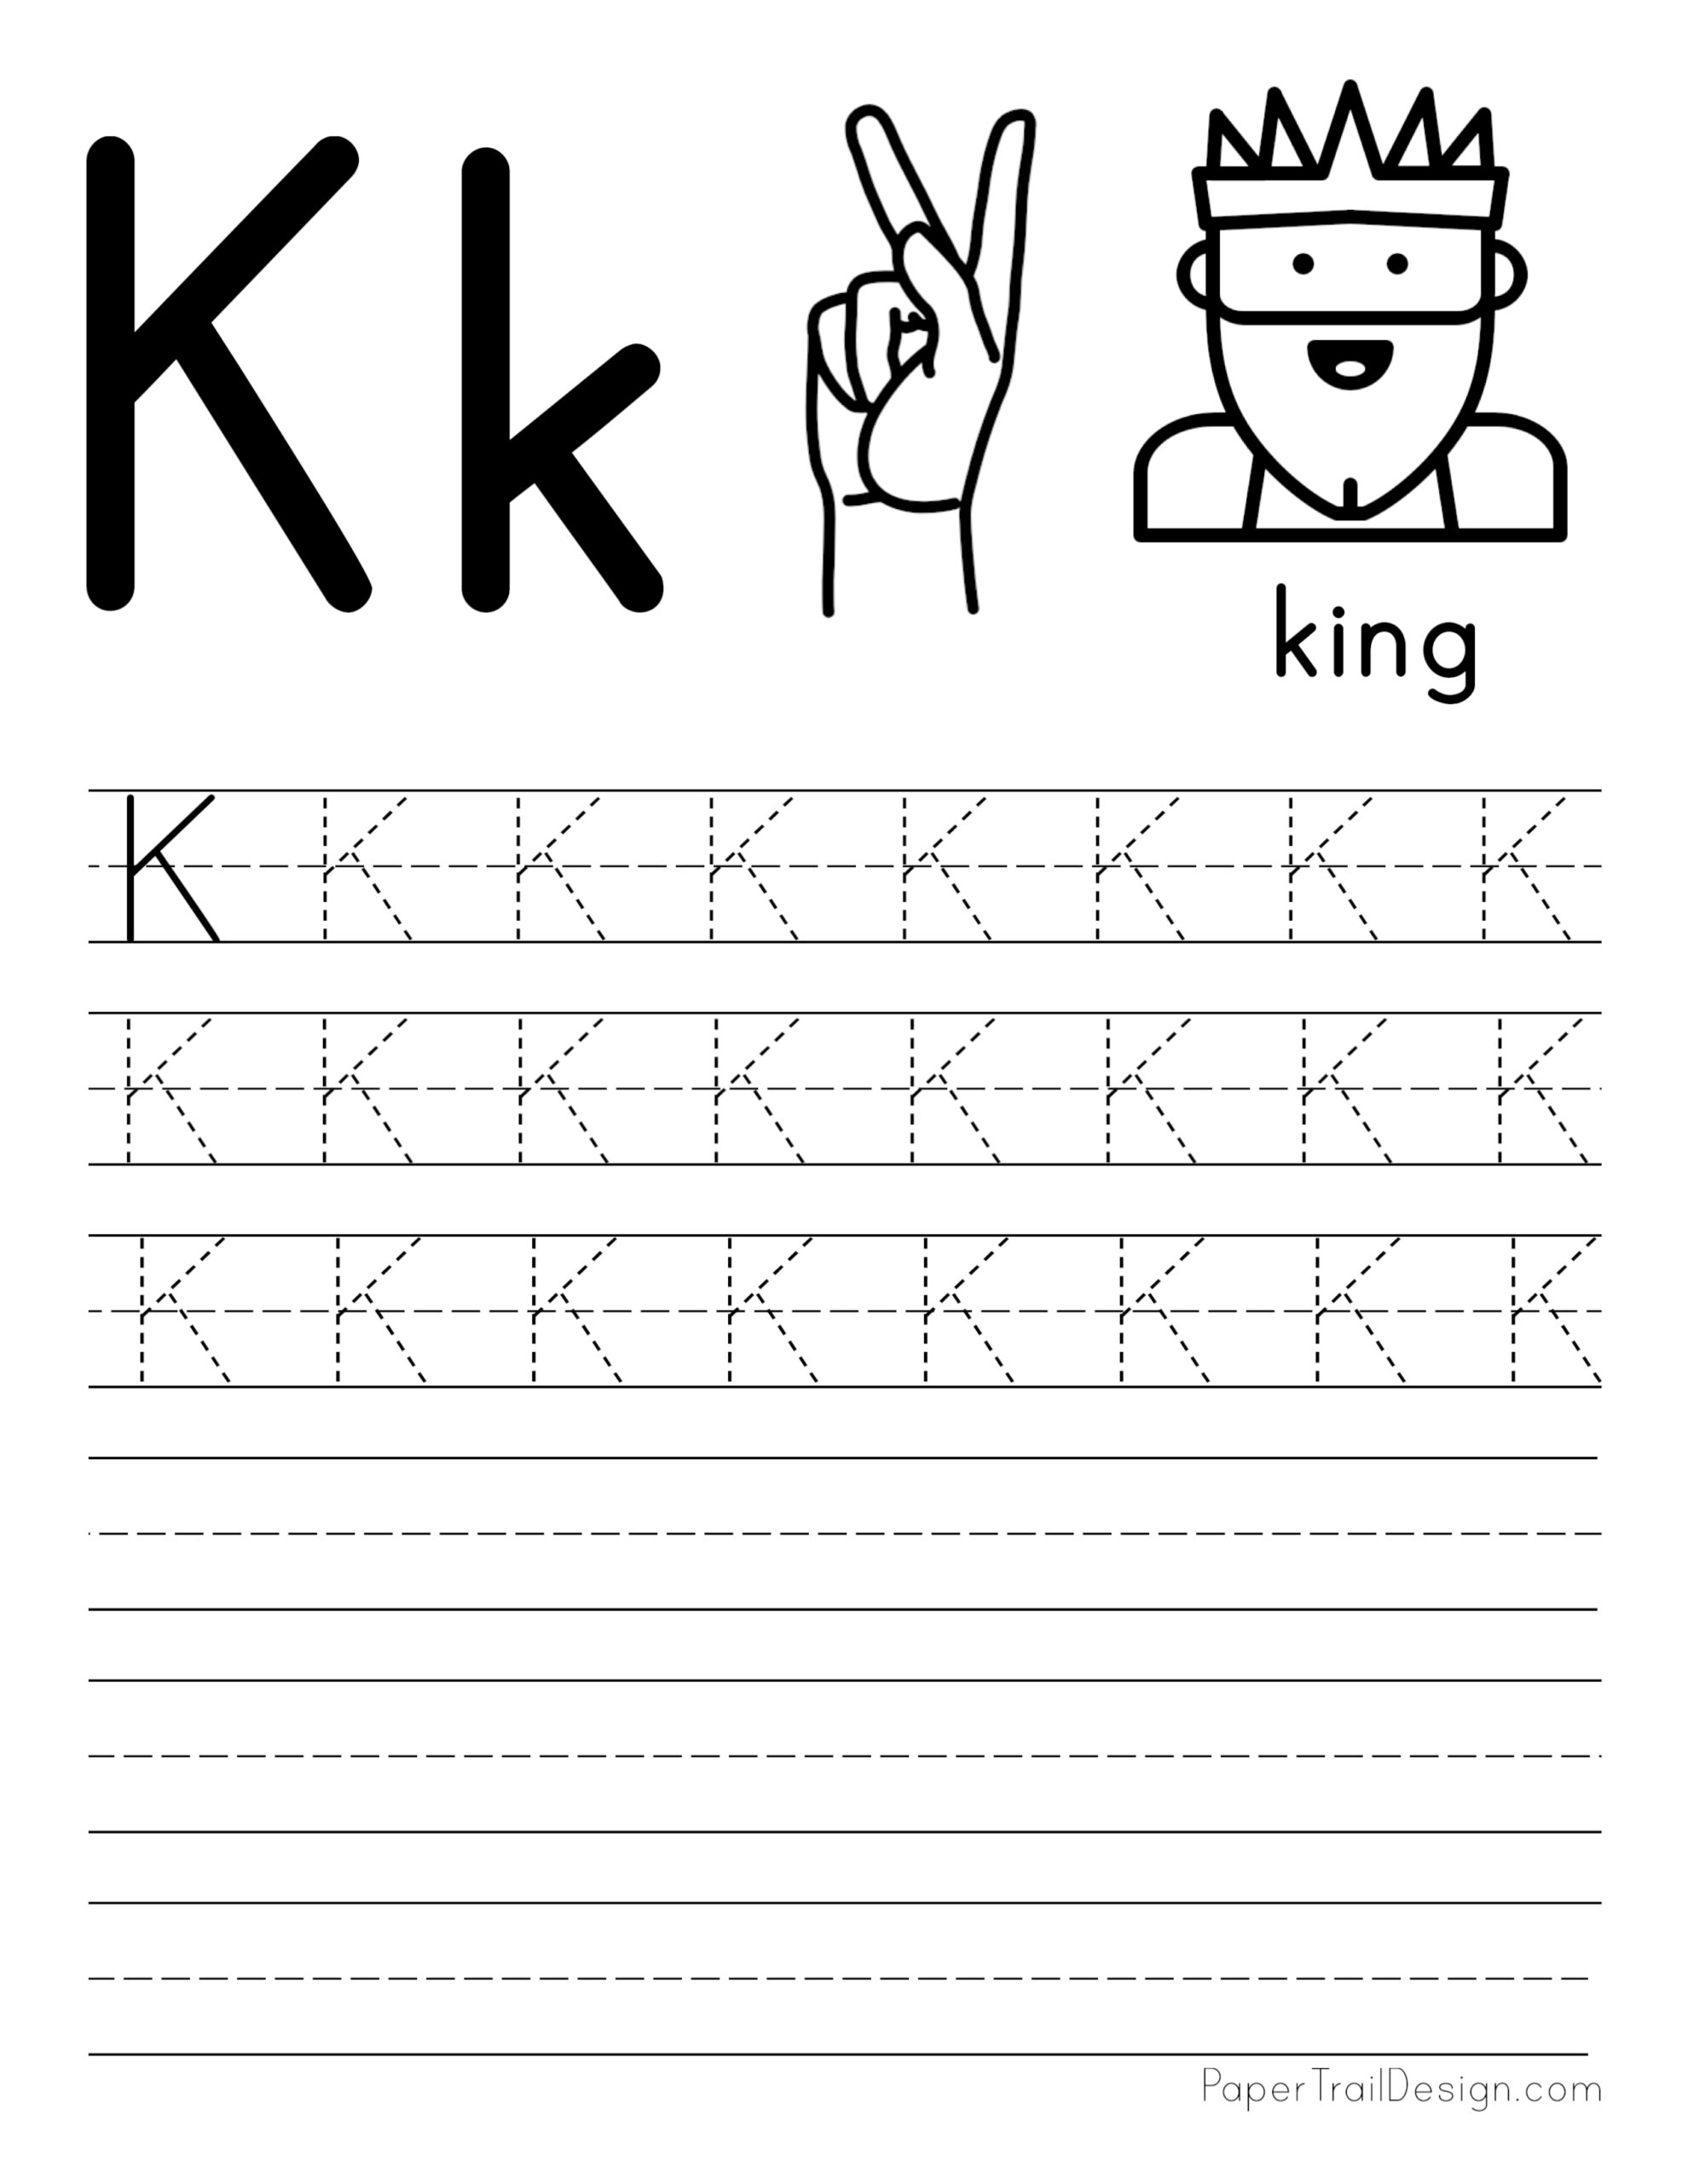 Lowercase Letter K Tracing Sheet - Printable Form, Templates and Letter